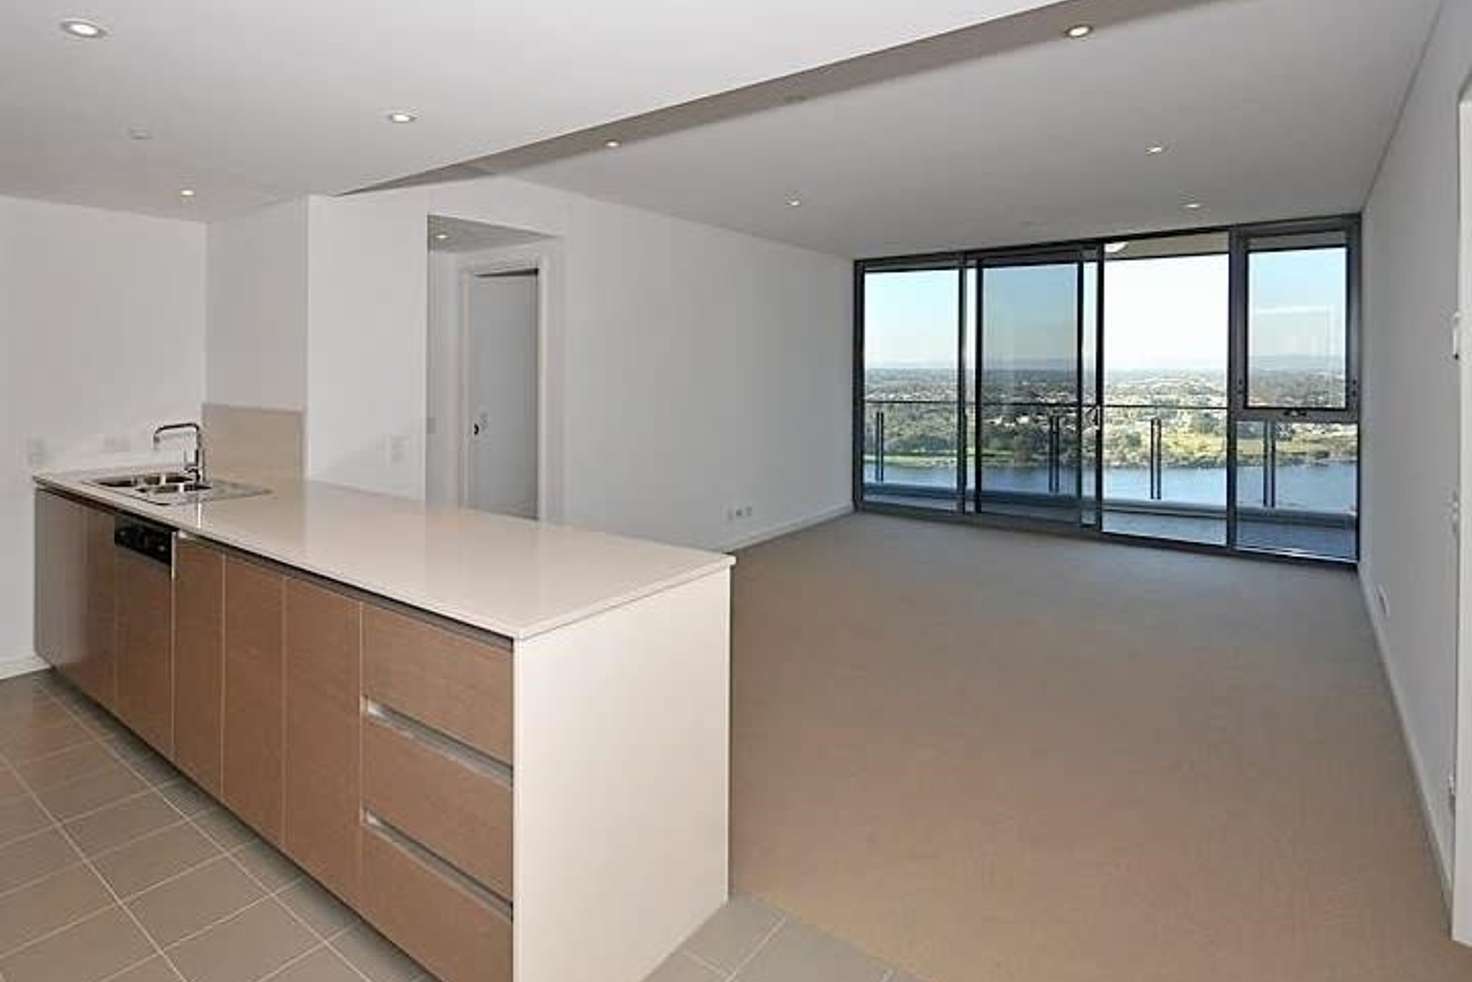 Main view of Homely apartment listing, 1706/96 Bow River Crescent, Burswood WA 6100